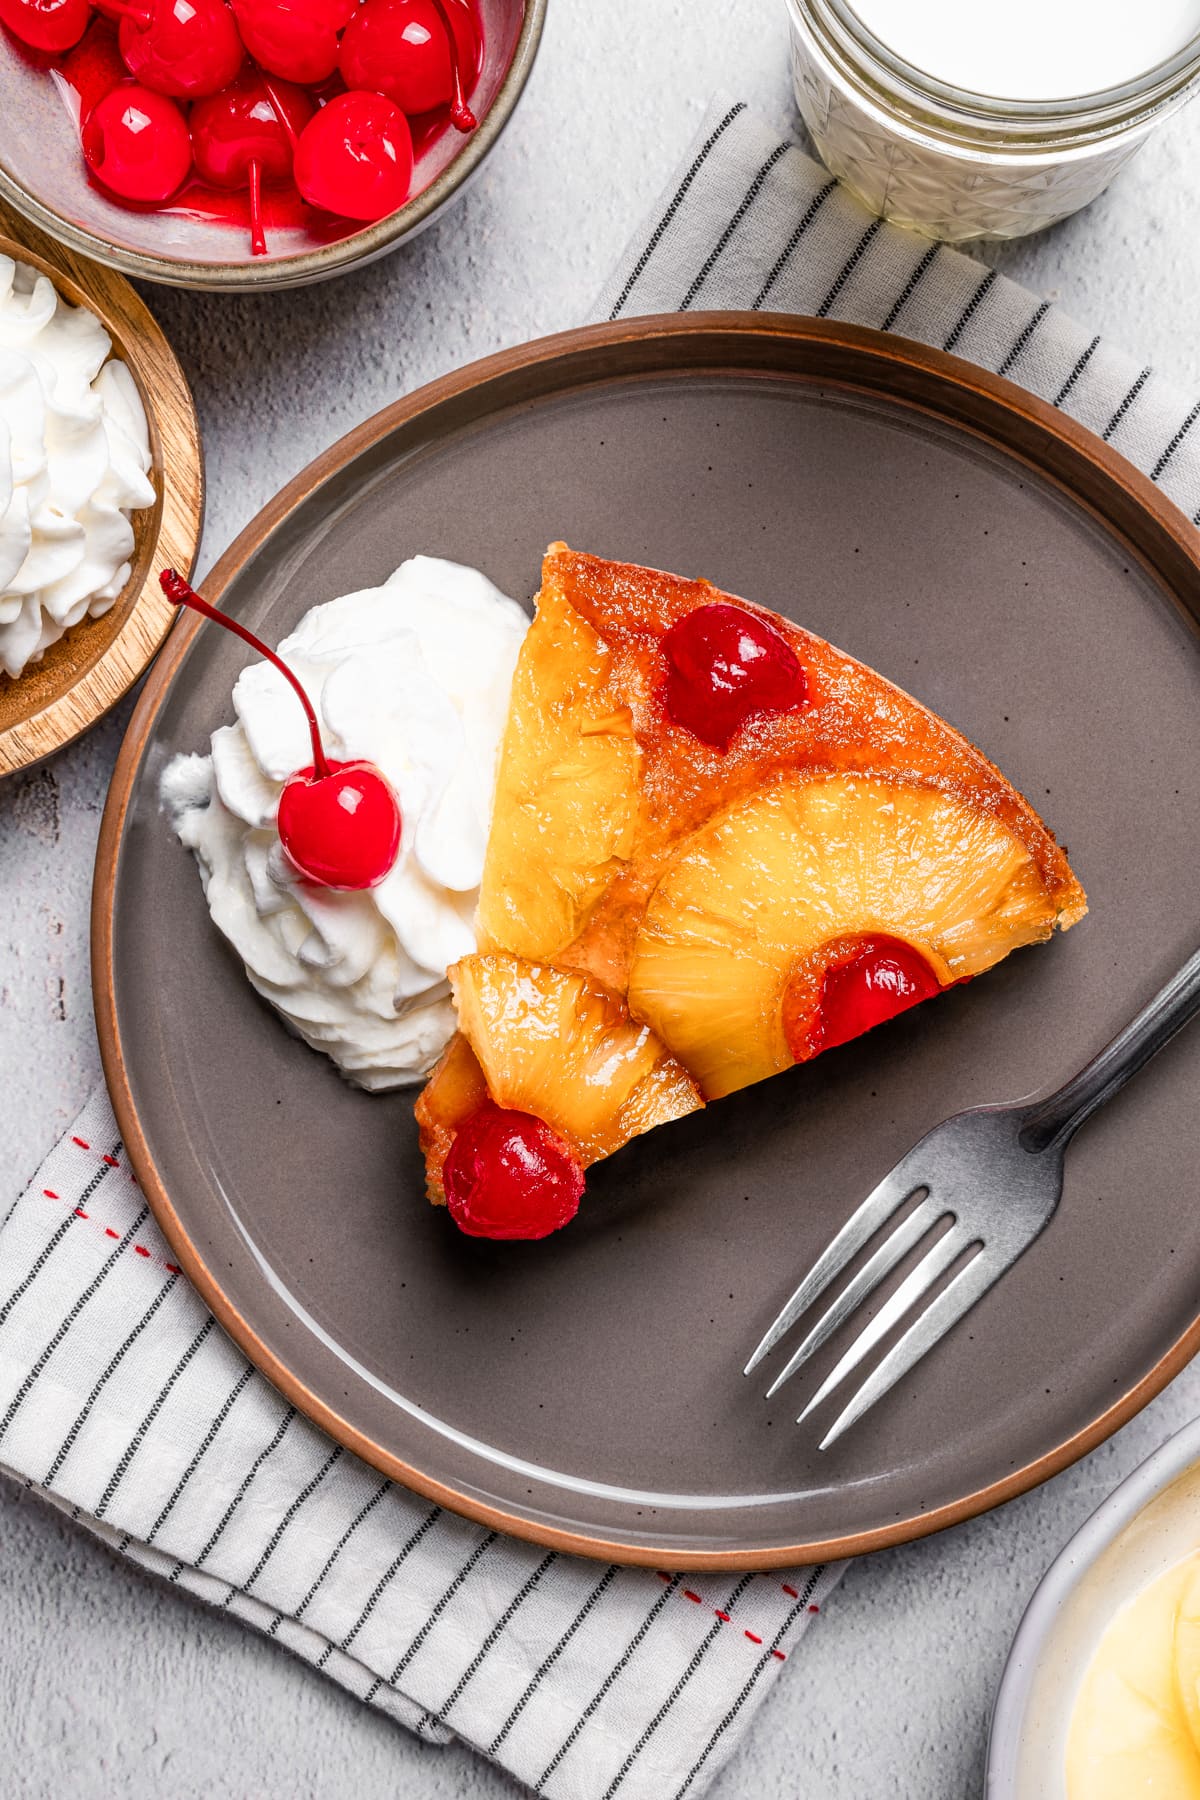 Slice of pineapple upside down cake on a stoneware plate, next to a fork and a swirl of whipped cream topped with a cherry.